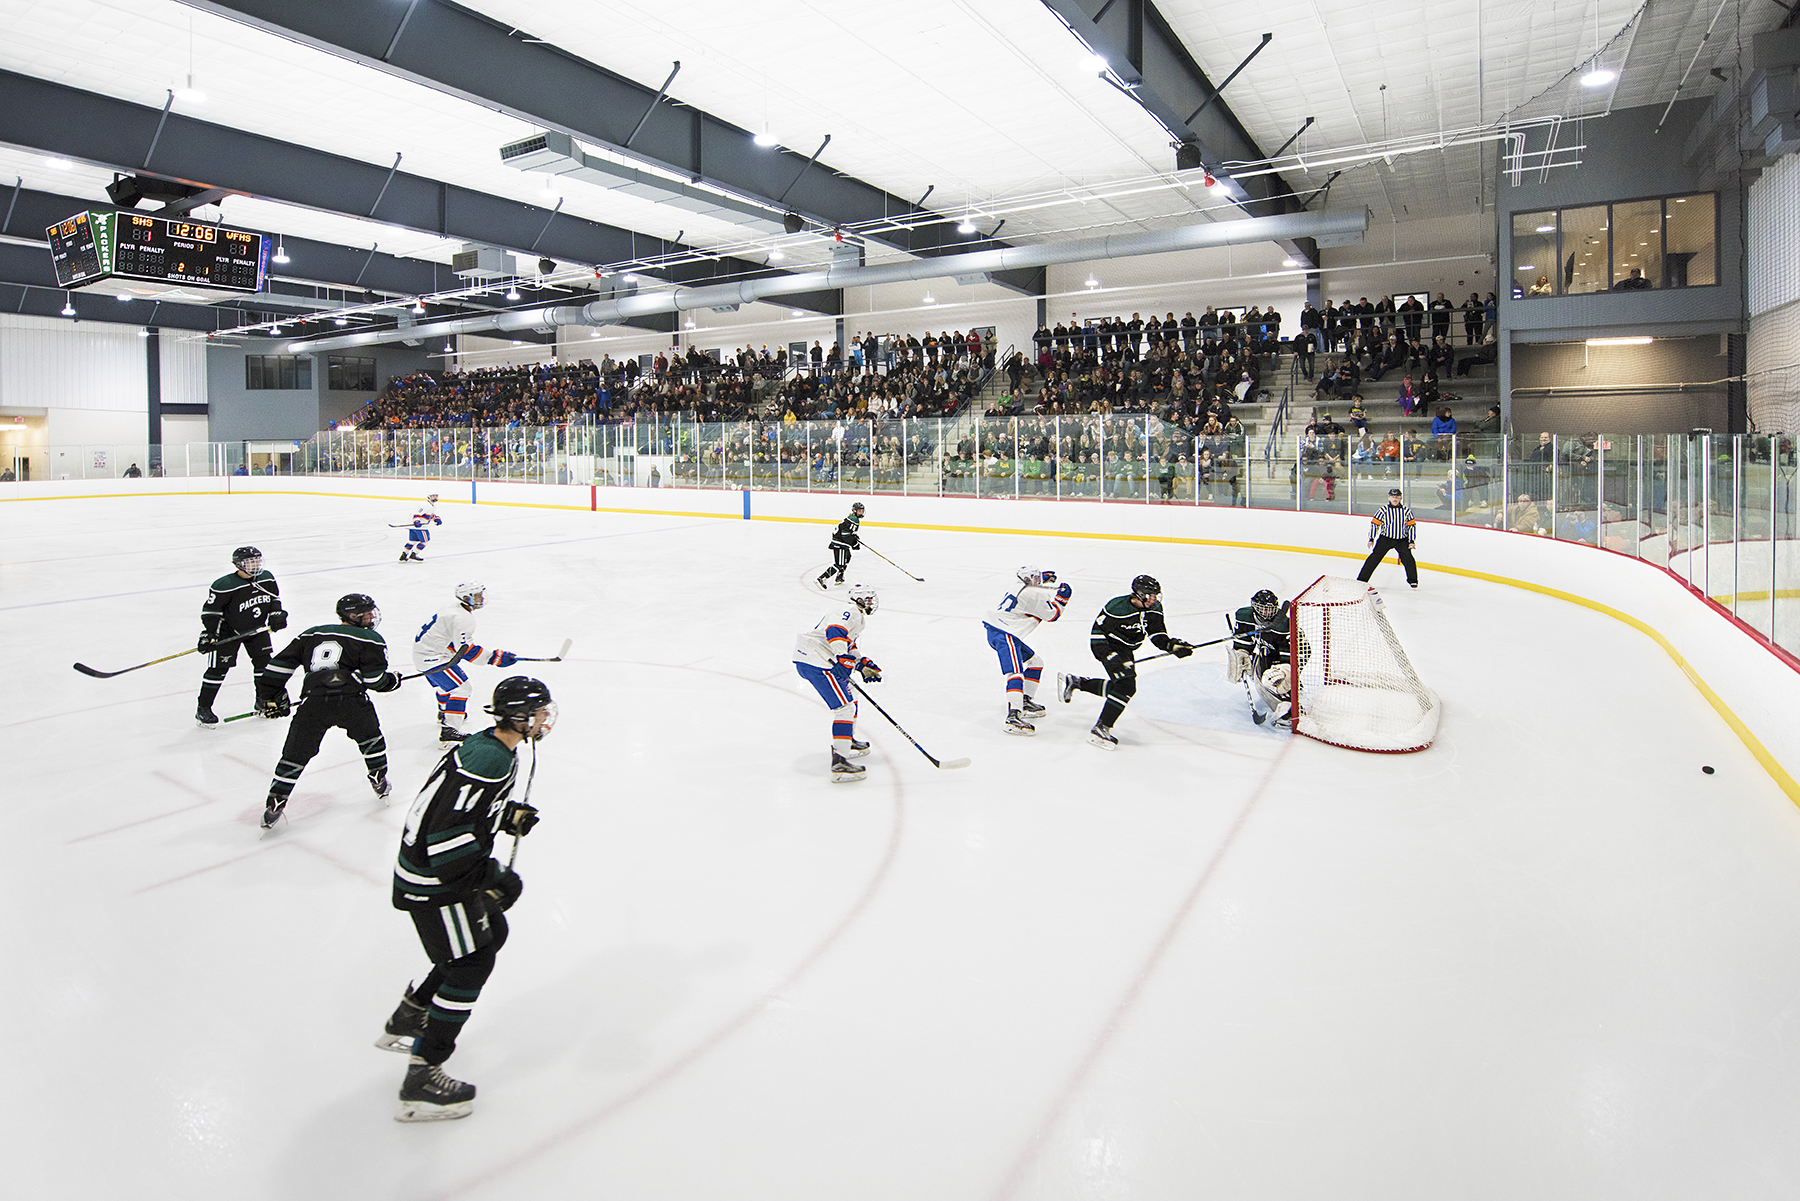 West Fargo Sports Arena - Let's play